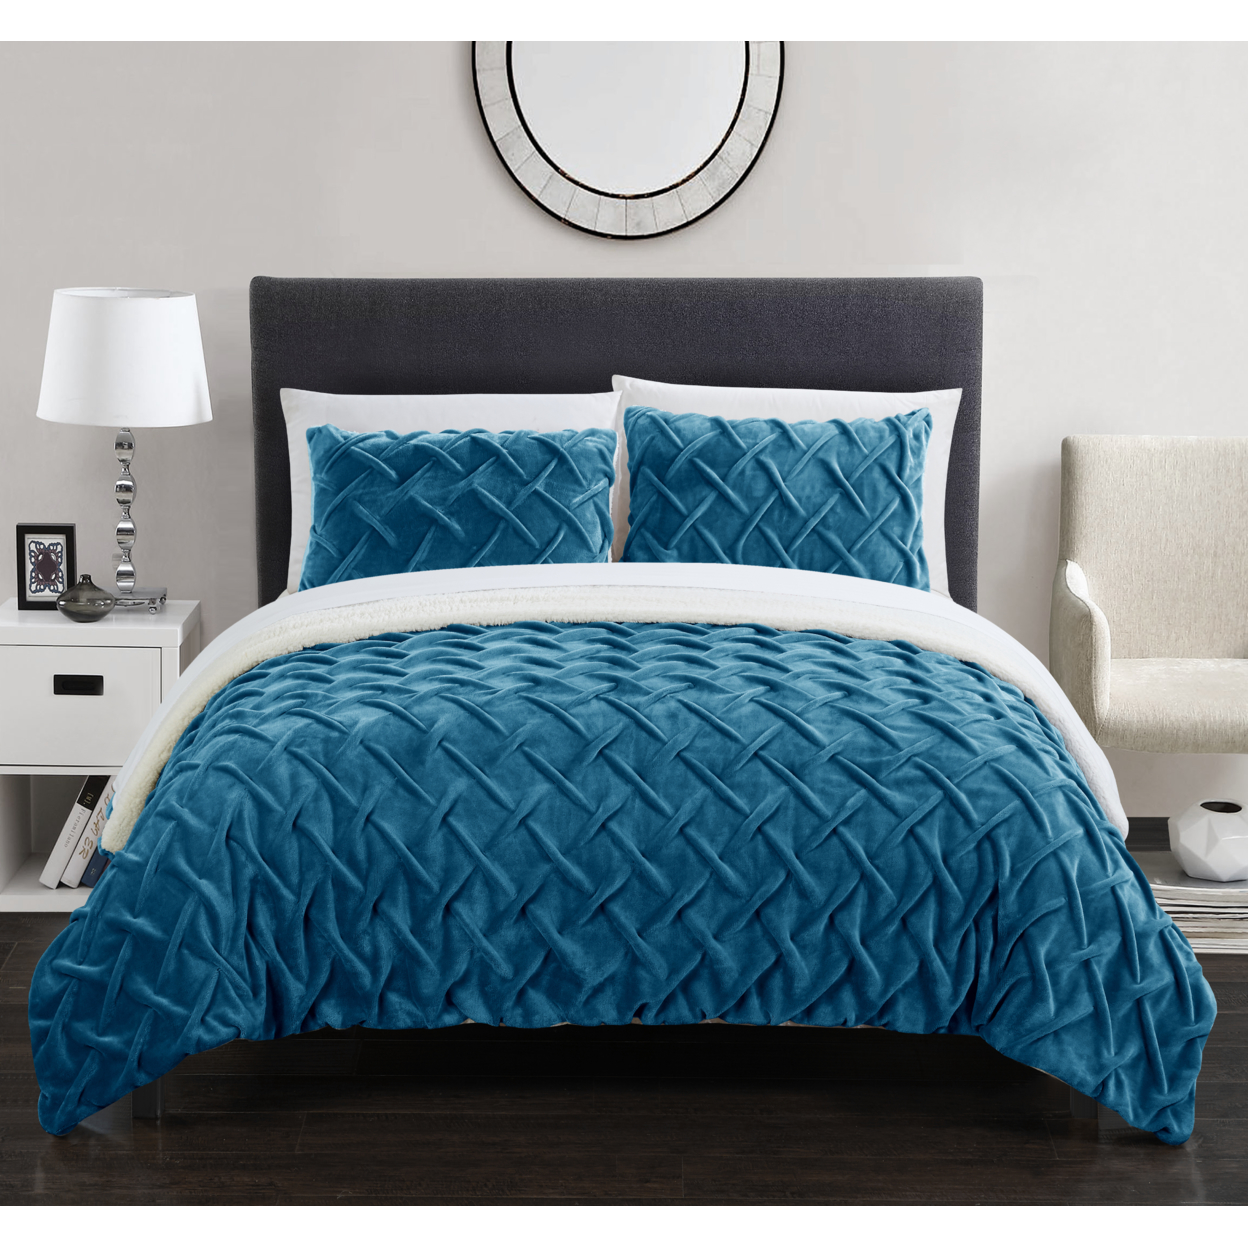 Thirsa 3 Or 2 Piece Comforter Set Ultra Plush Micro Mink Criss Cross Pinch Pleat Sherpa Lined Bedding - Teal, Queen